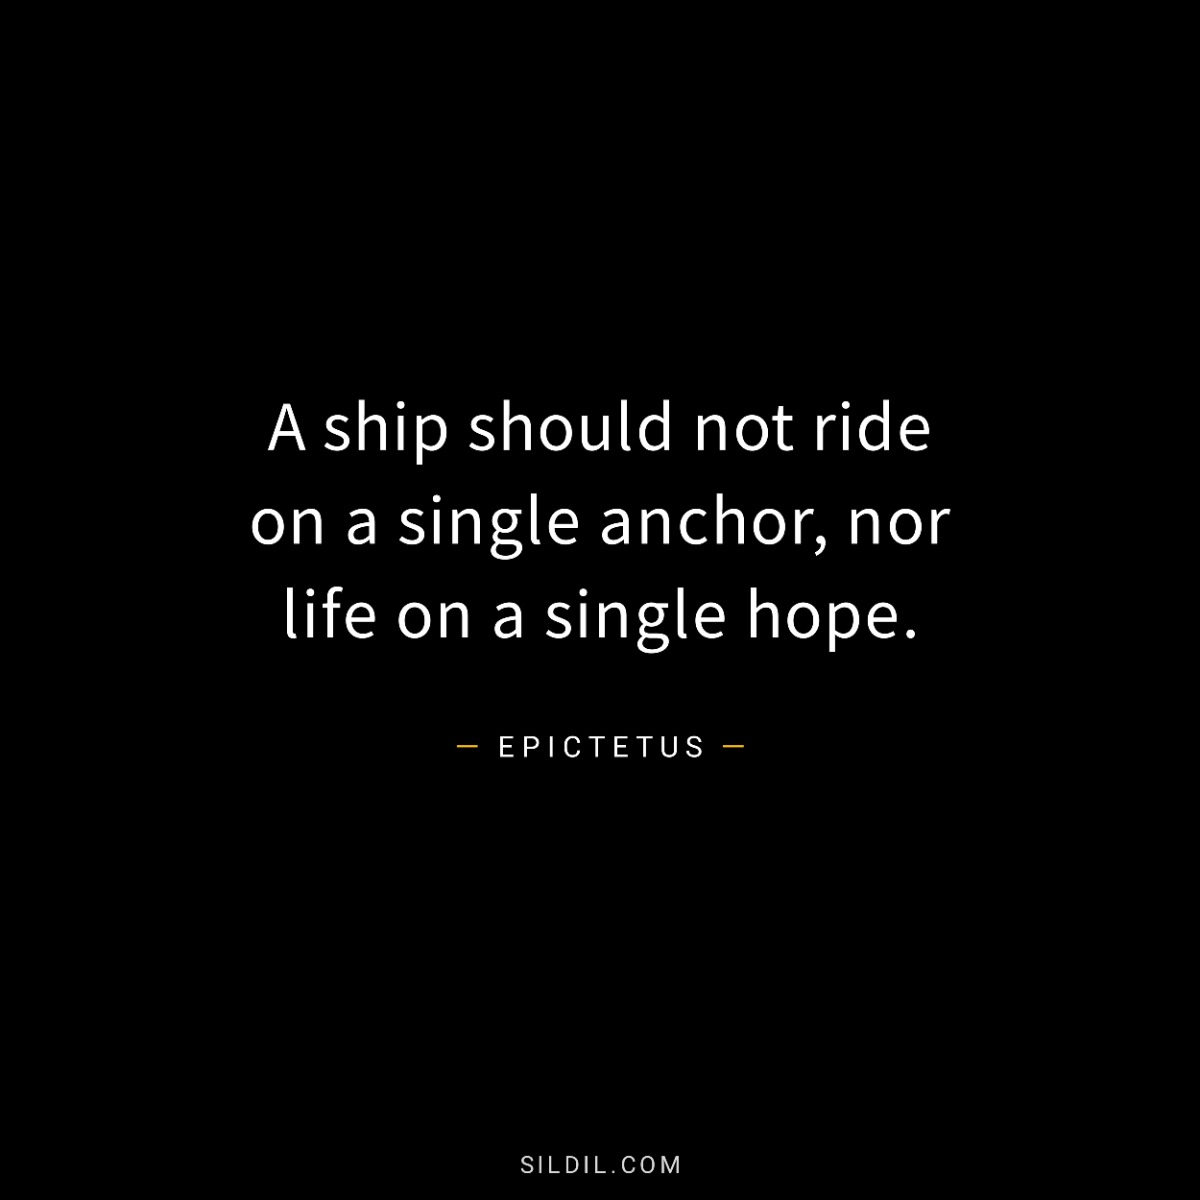 A ship should not ride on a single anchor, nor life on a single hope.